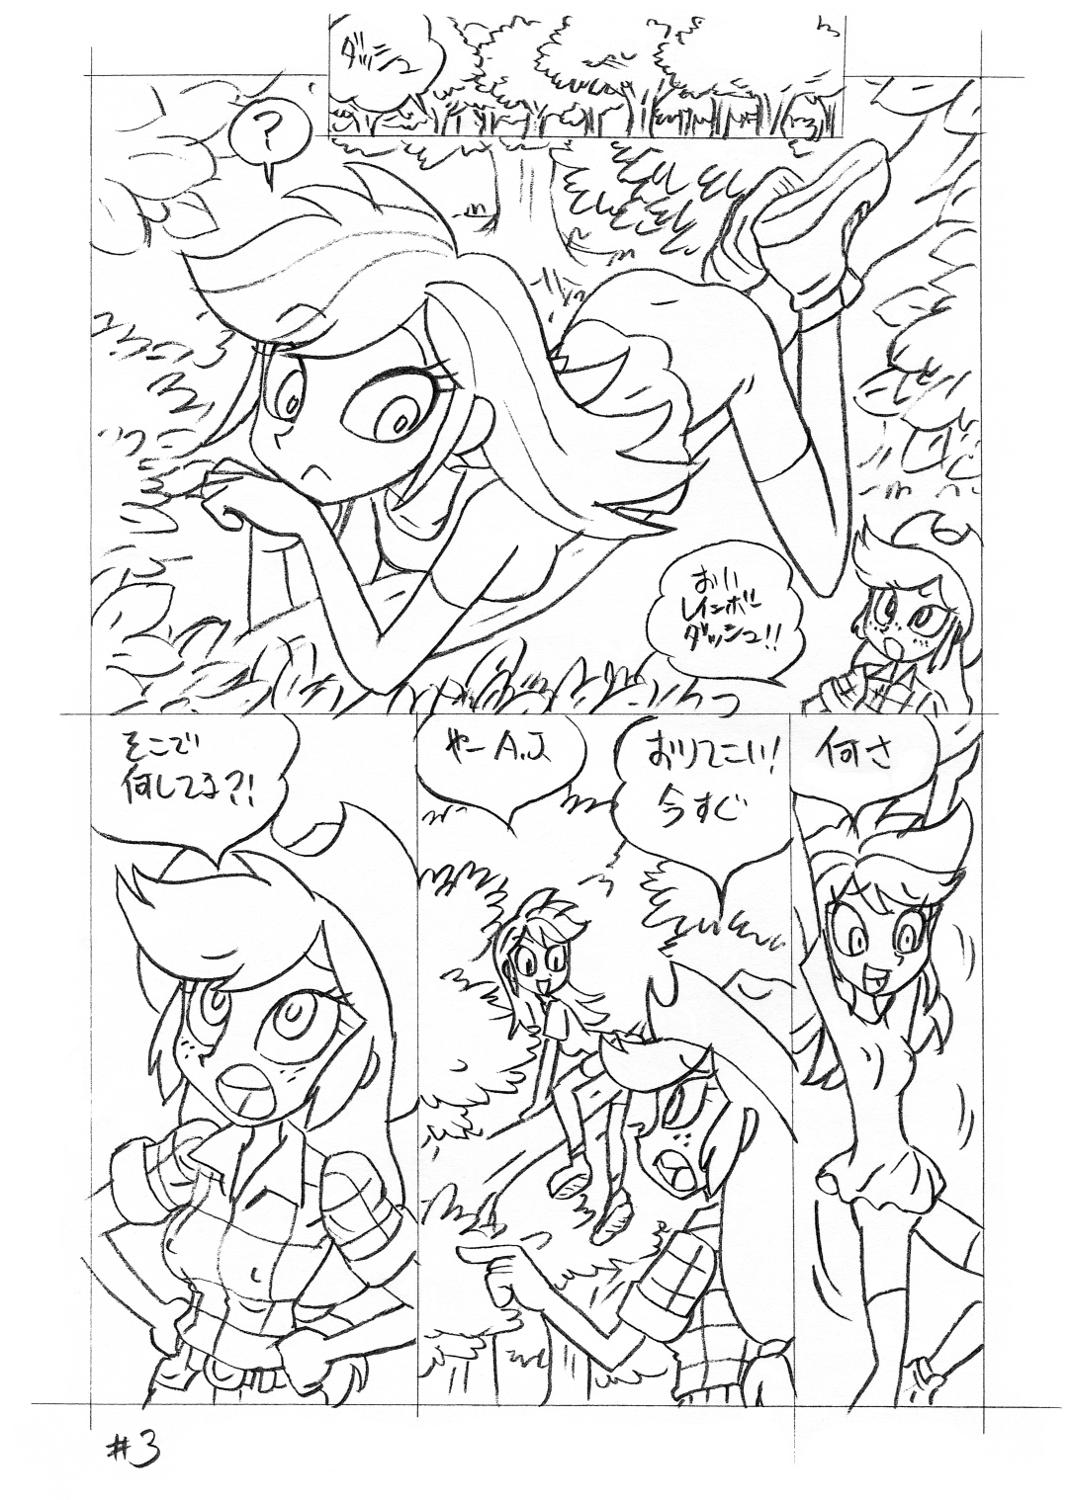 Spread Psychosomatic Counterfeit EX- A.J. in E.G. Style - My little pony friendship is magic Bukkake Boys - Page 2